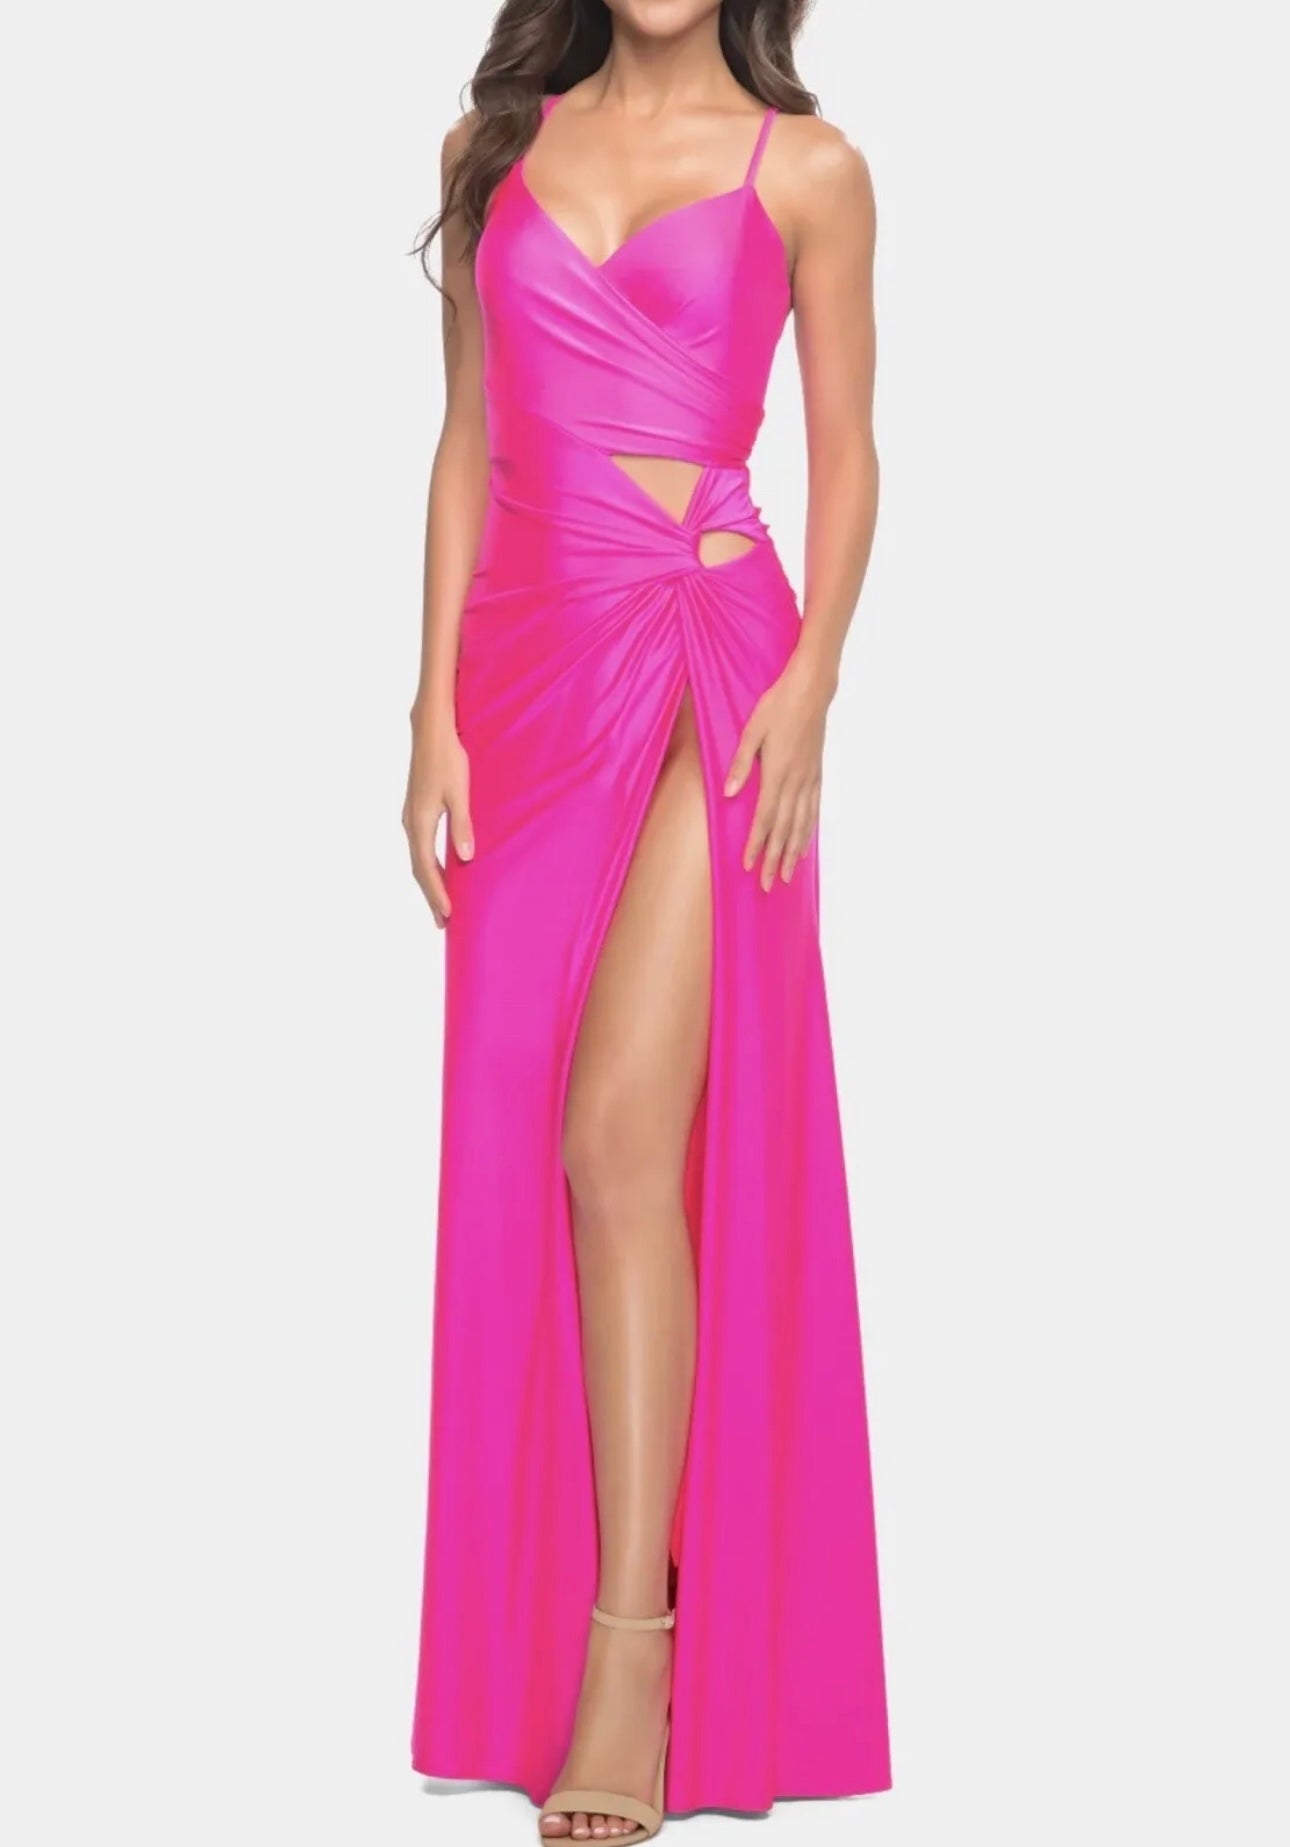 La Femme Asymmetrical Cutout Ruched Gown Hot Pink Pre-Owned